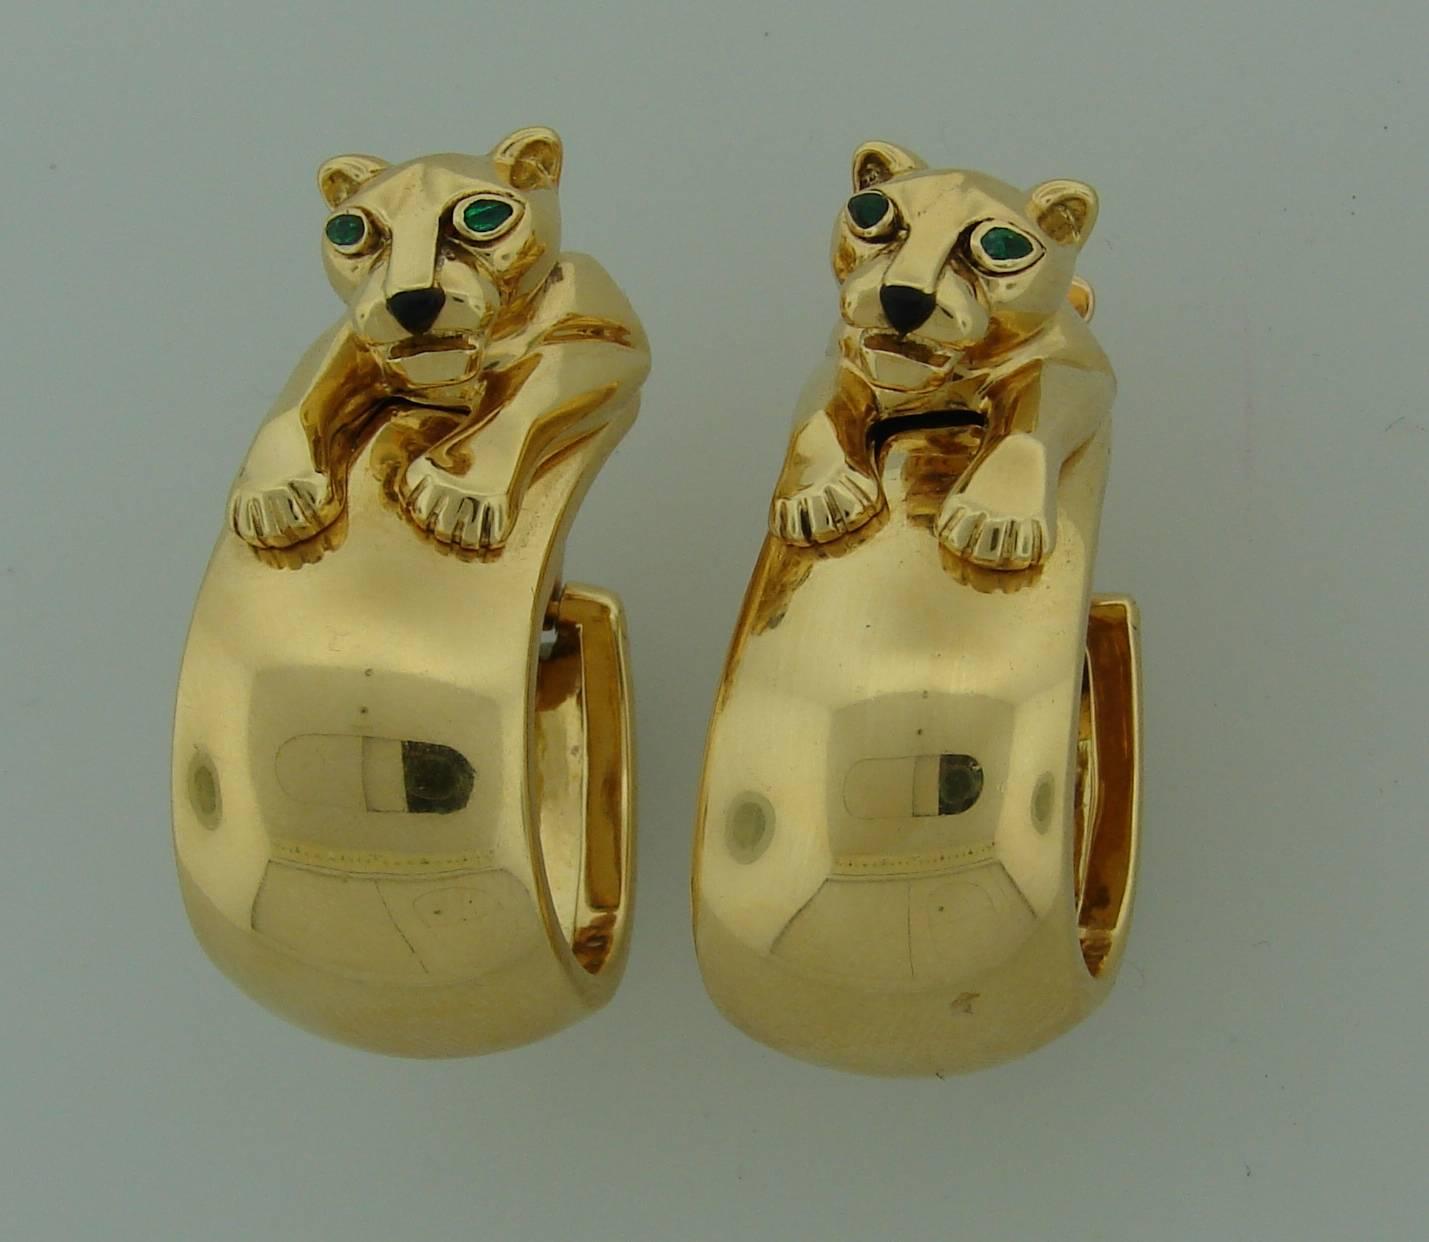 Signature Cartier Panthere Collection earrings. Made of 18k yellow gold, the panther's eyes are made of emerald, the nose - of black onyx. Cartier do not make this particular model anymore which makes them desirable and collectable.
The earrings